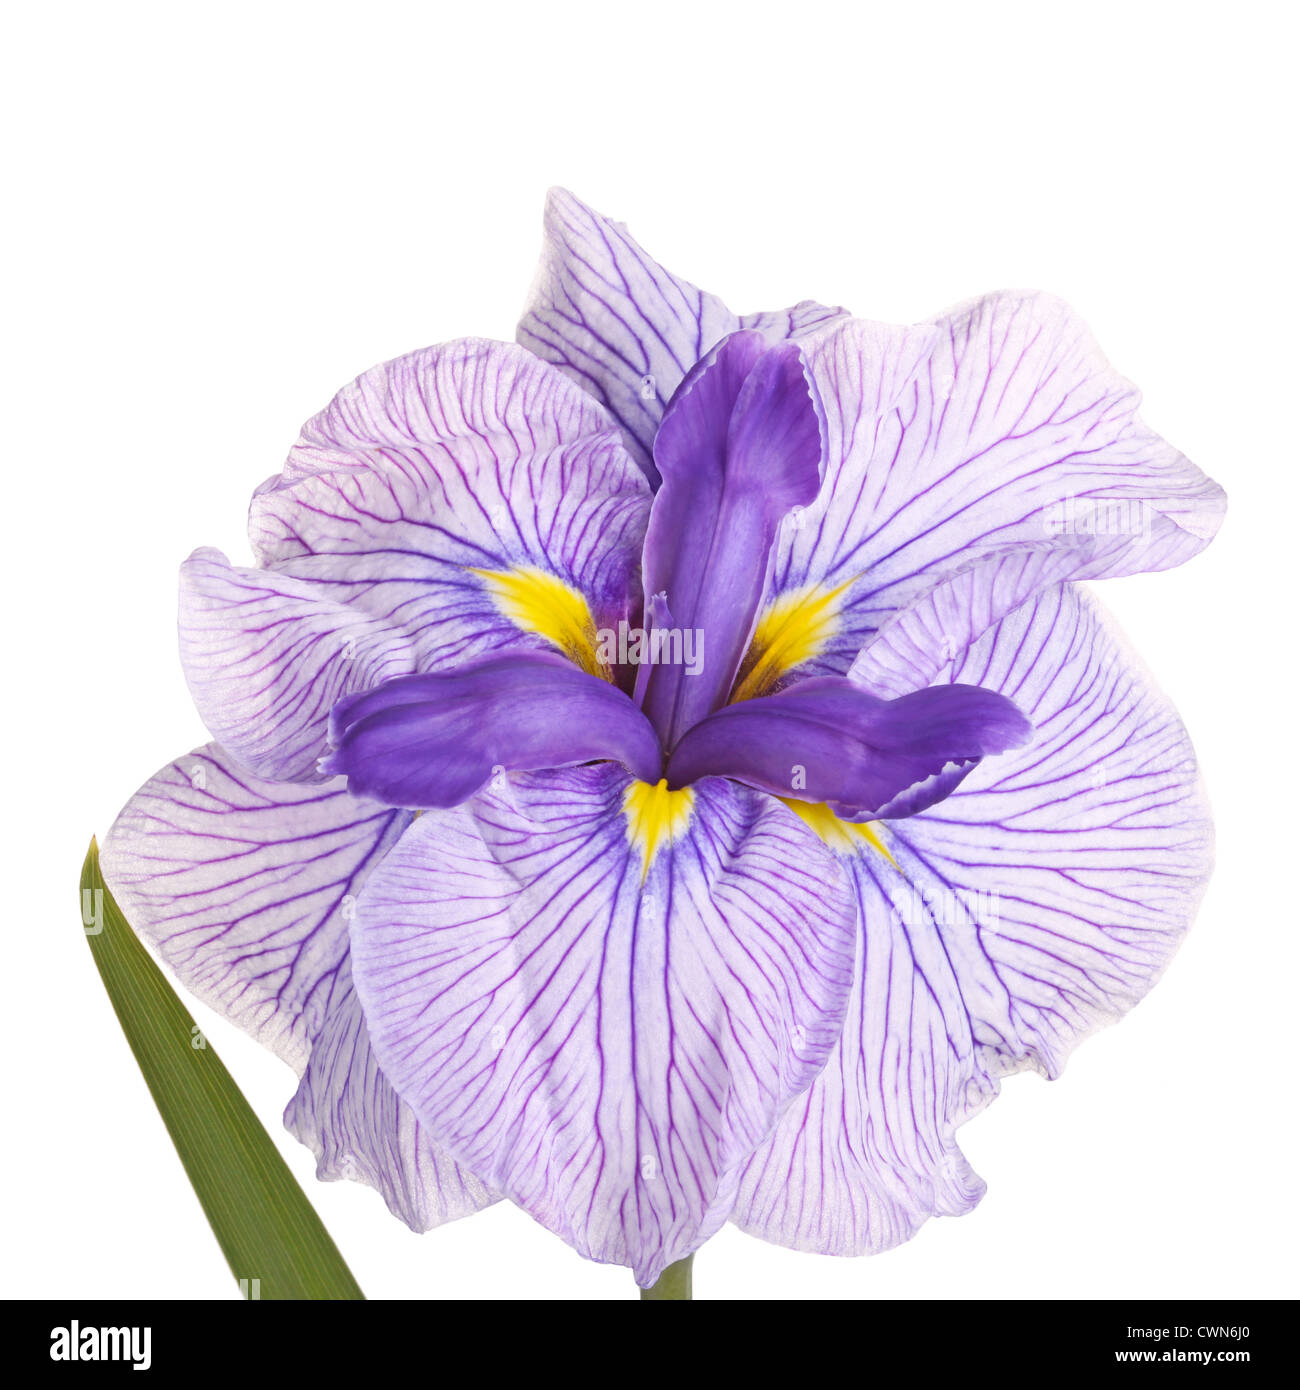 Purple, yellow and white flower of a Japanese iris cultivar (Iris ensata) isolated against a white background Stock Photo